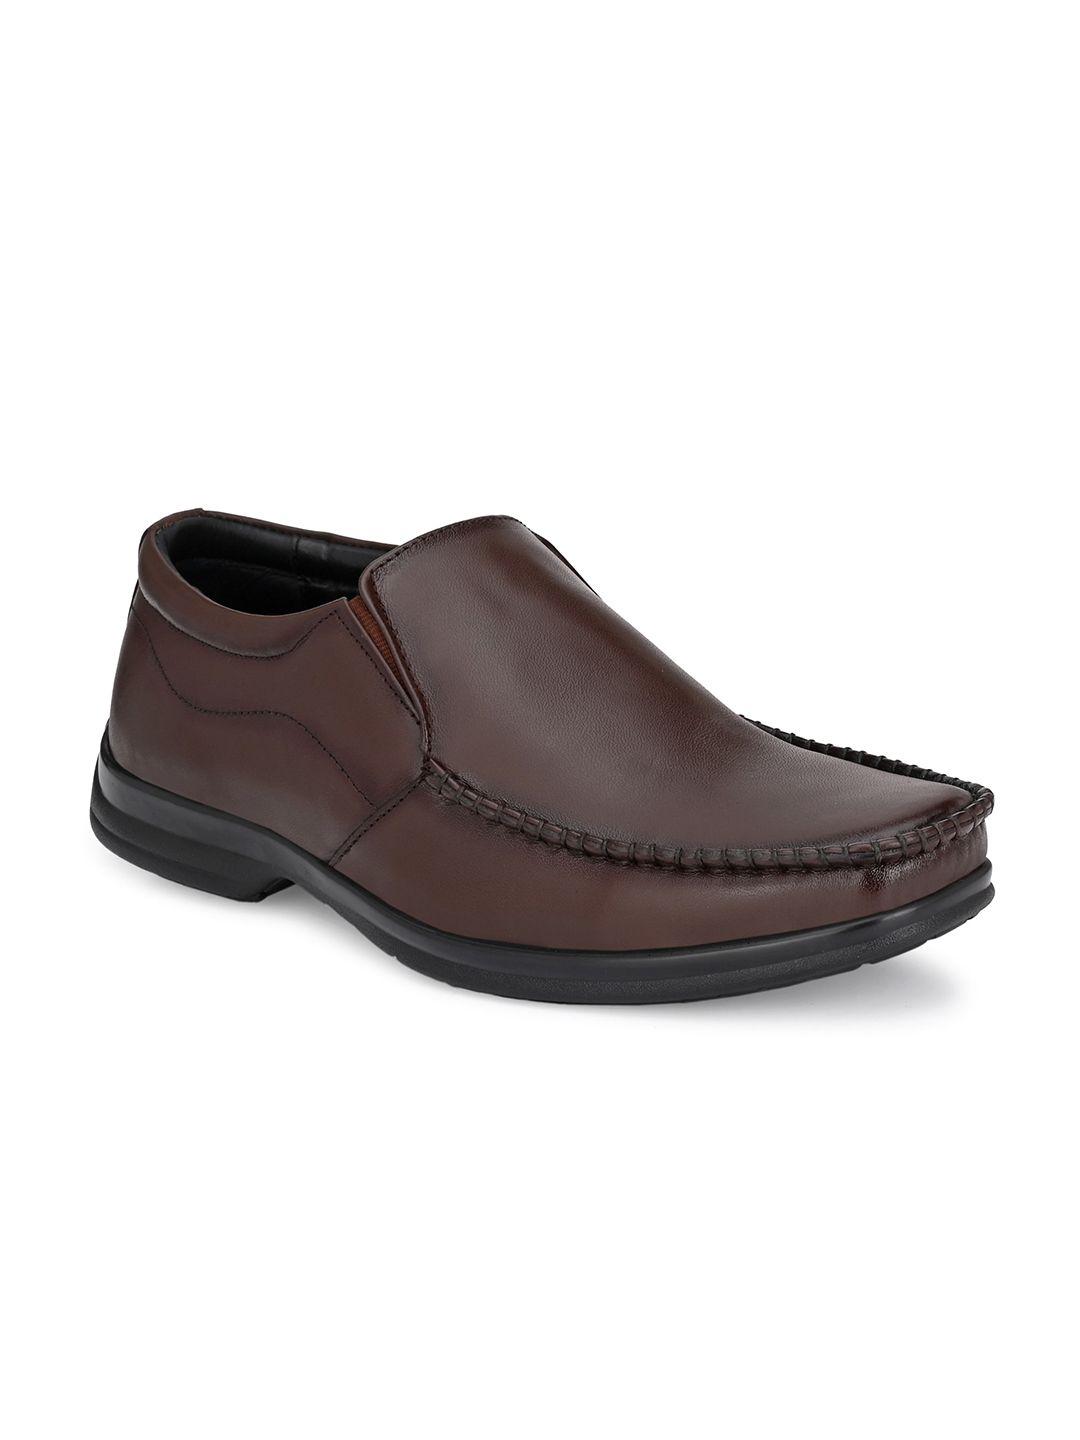 eego italy men leather formal slip-on shoes